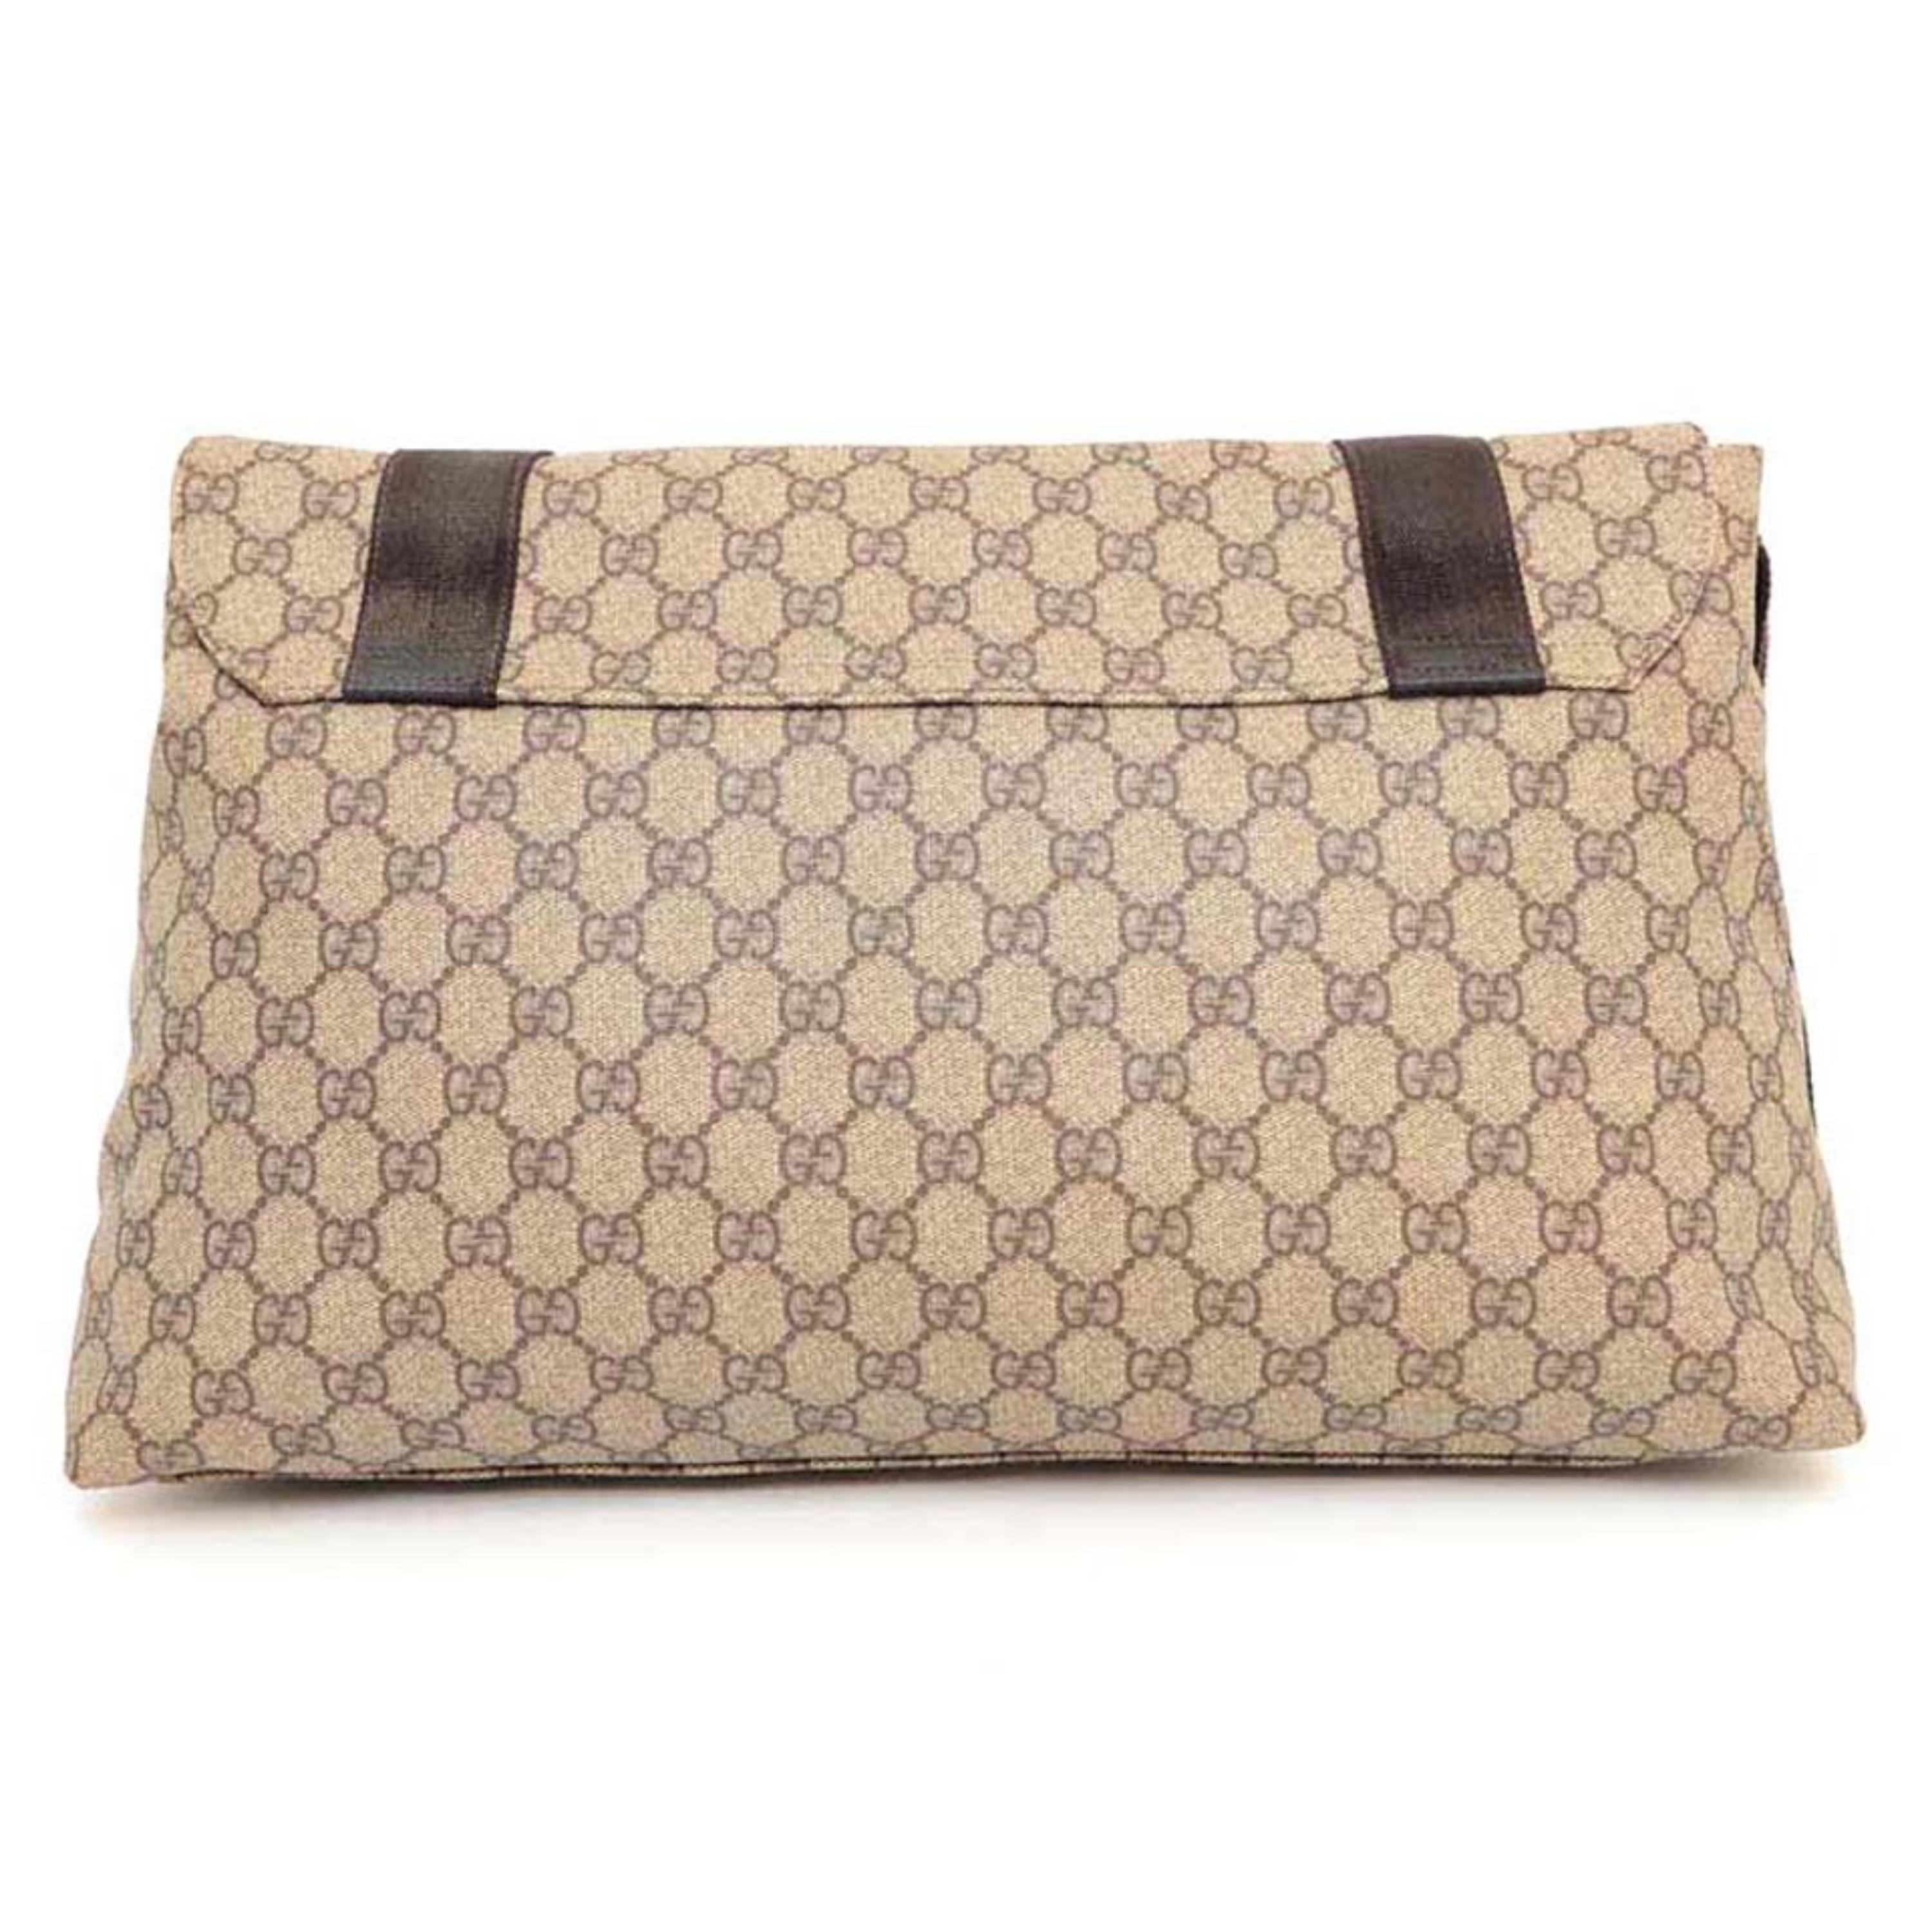 Gucci Monogram Gg Supreme Messenger 227763 Brown Coated Canvas Cross Body Bag For Sale 1